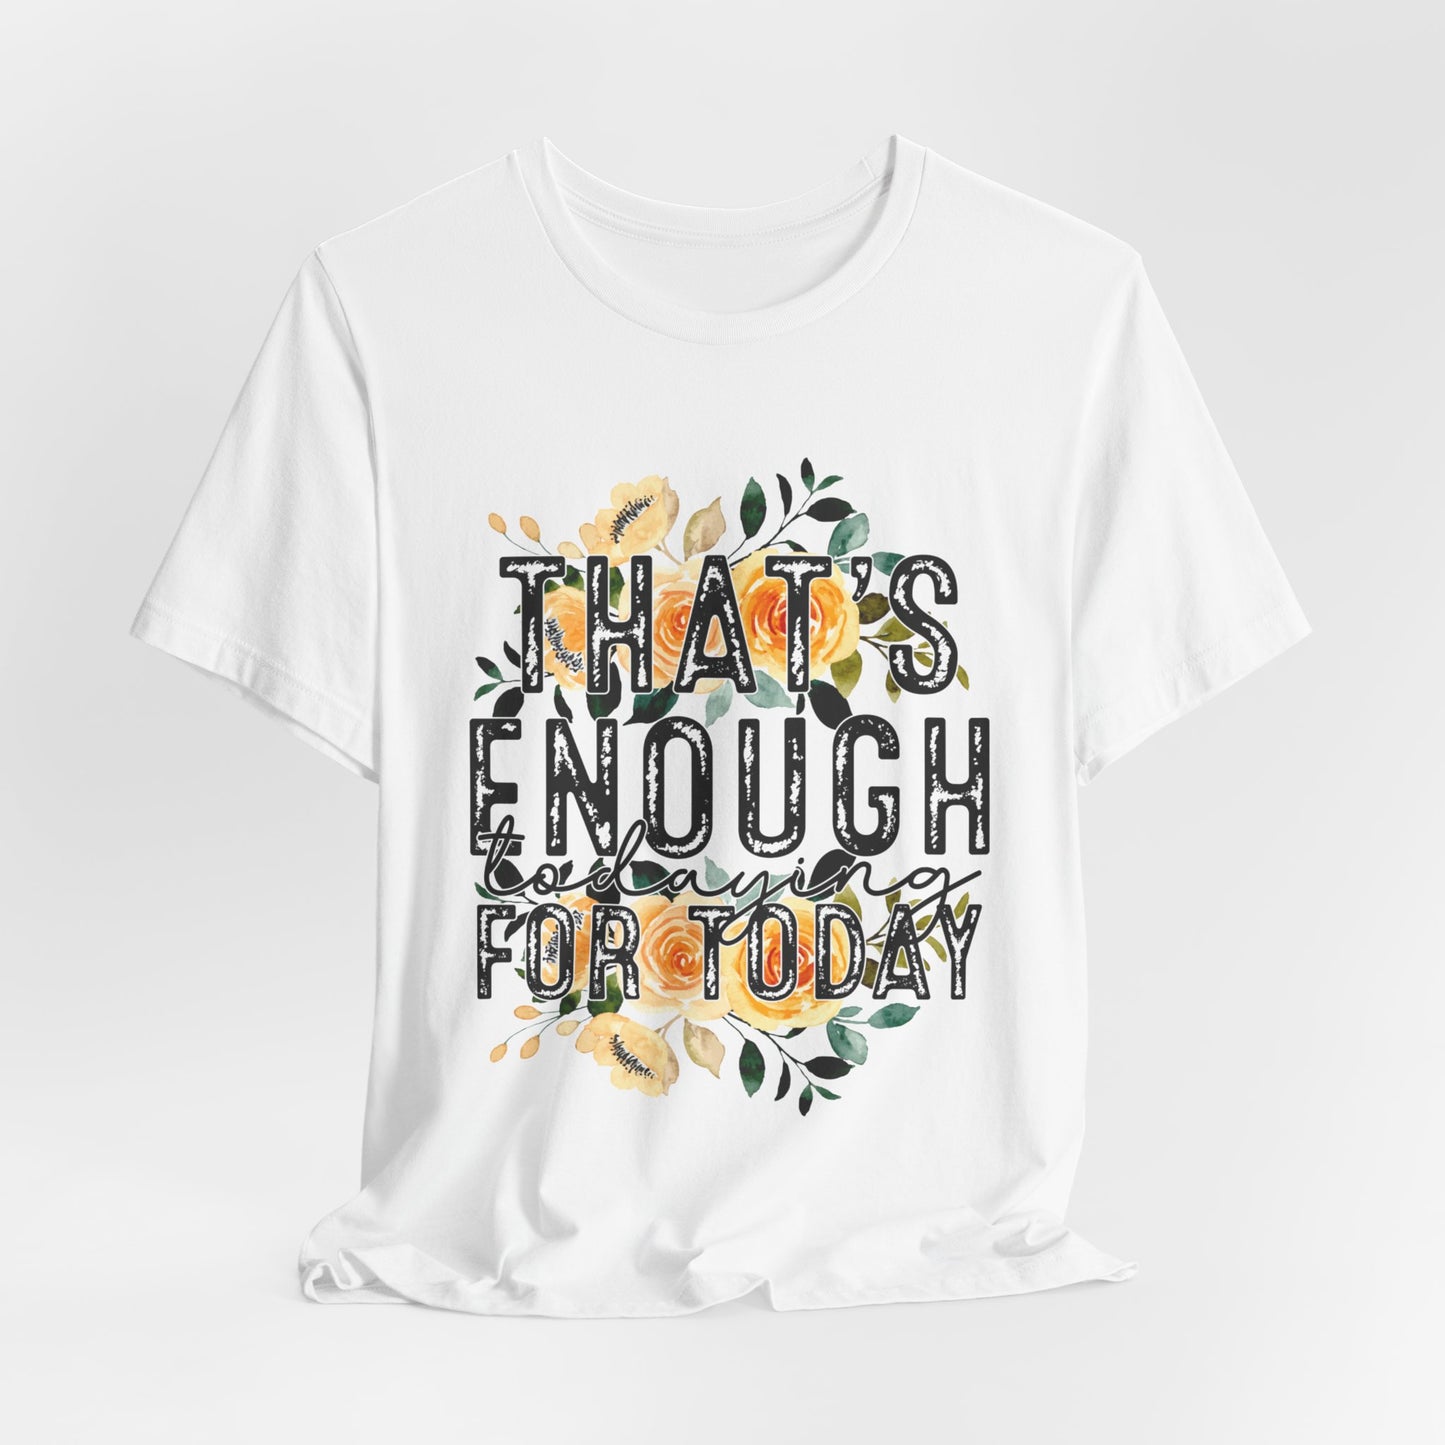 Enough For Today Women's Funny Short Sleeve Tshirt